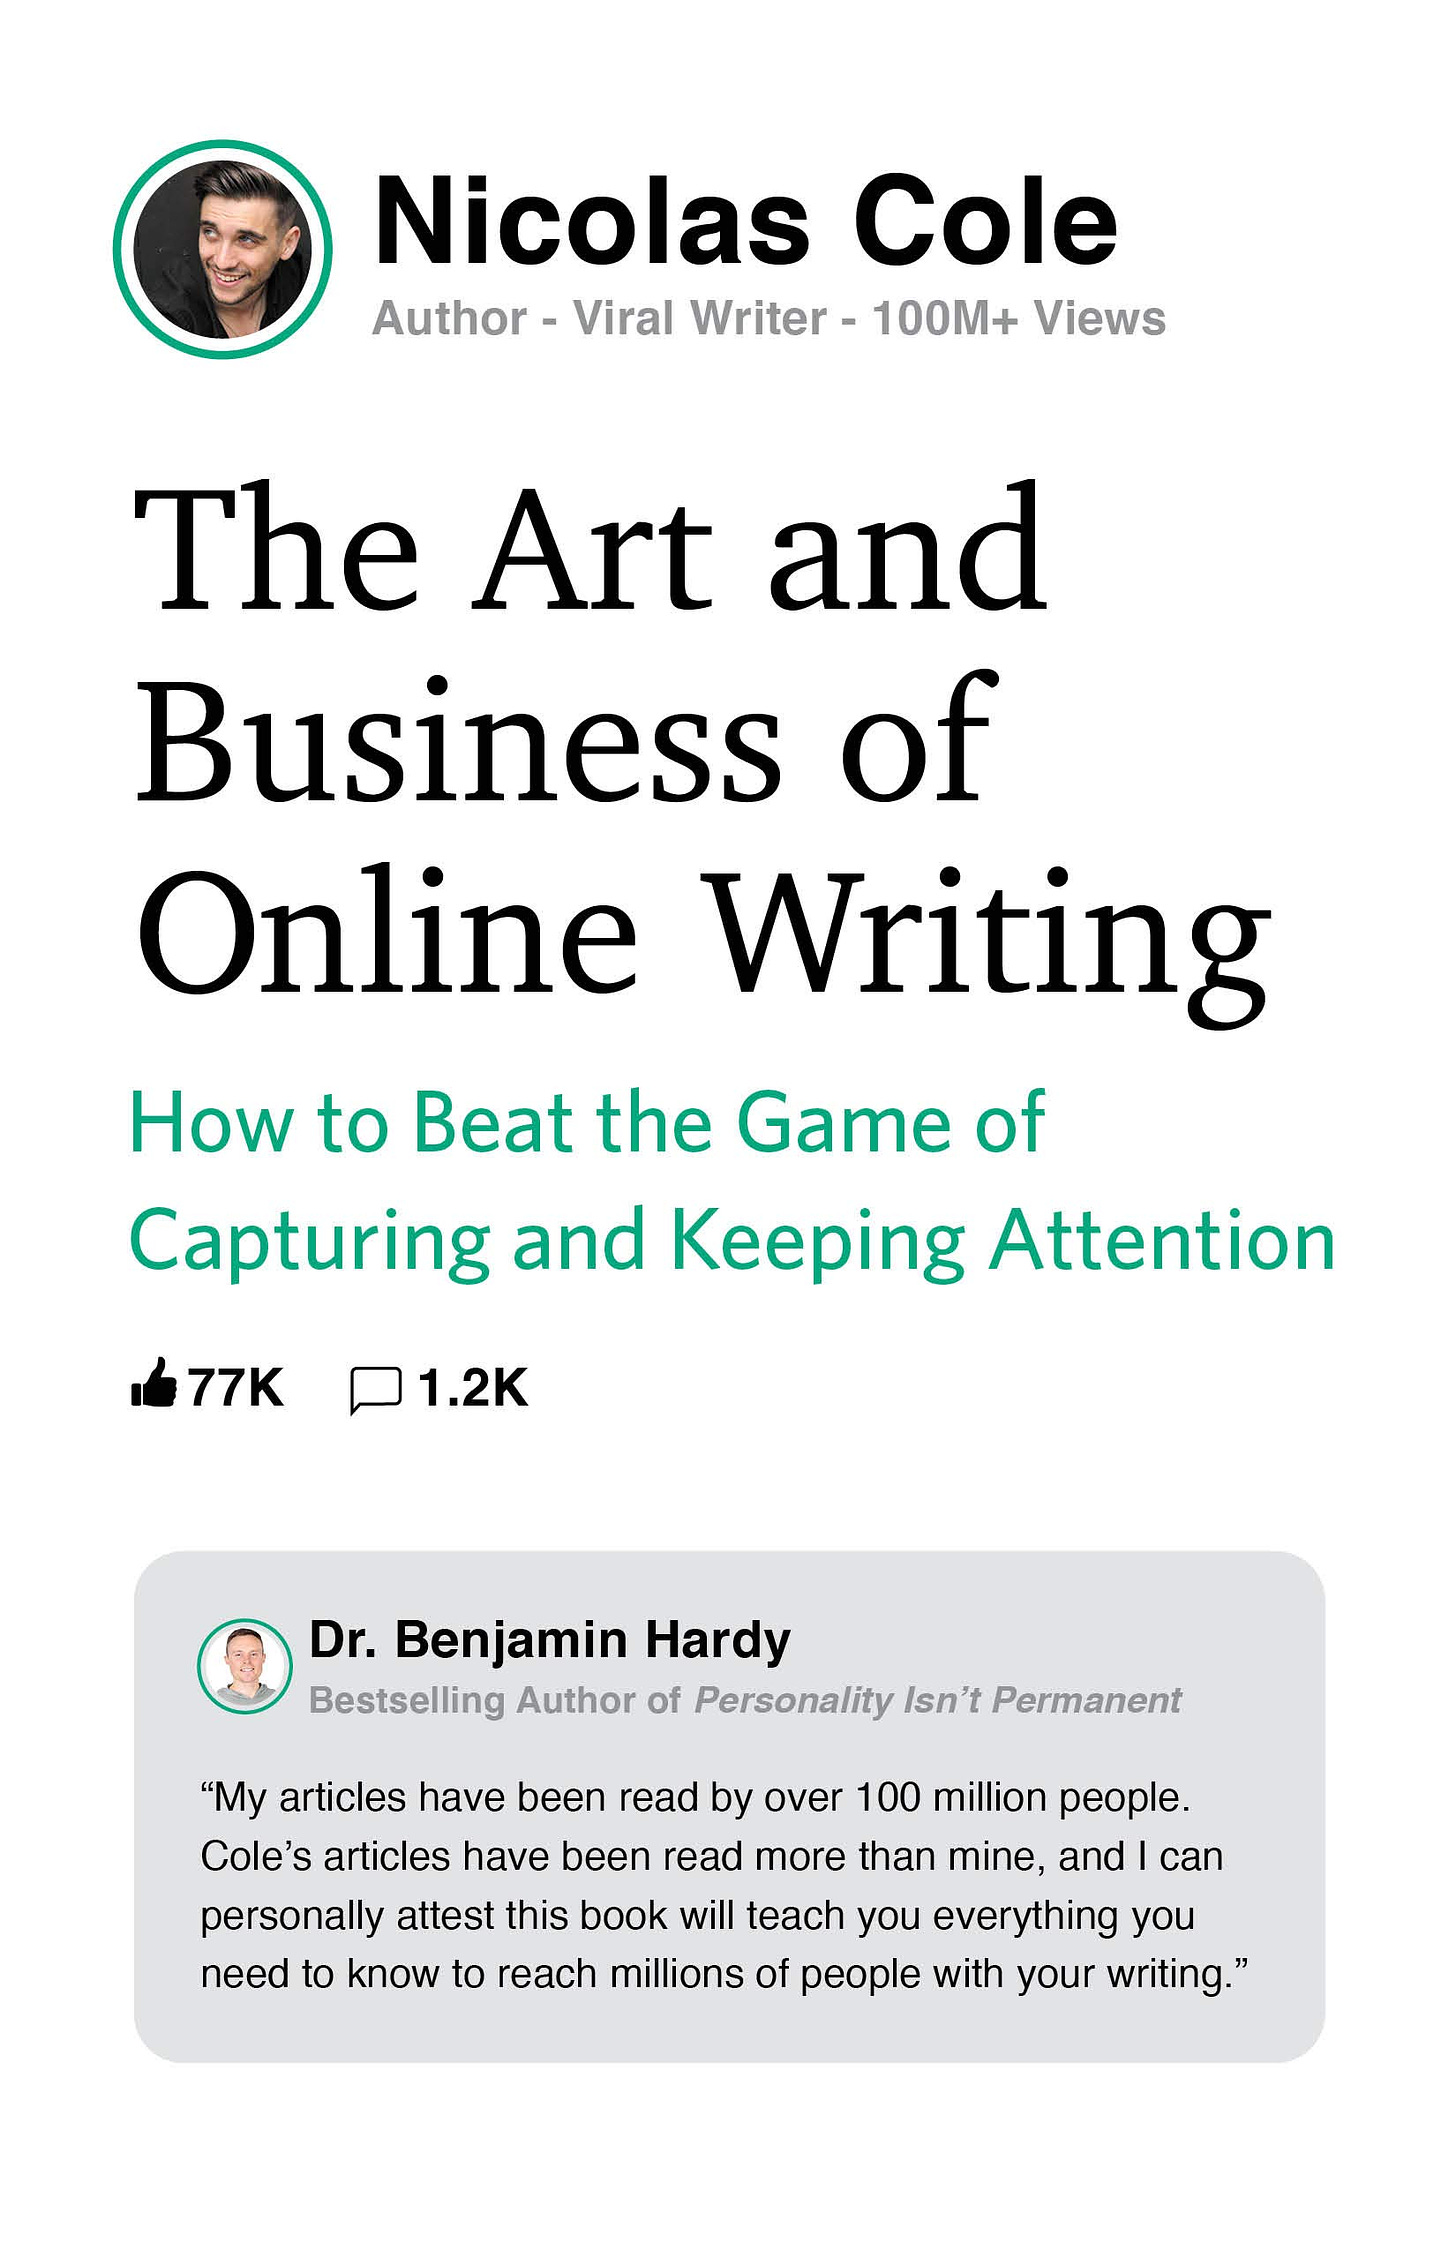 The Art and Business of Online Writing: How to Beat the Game of Capturing  and Keeping Attention by Nicolas Cole | Goodreads